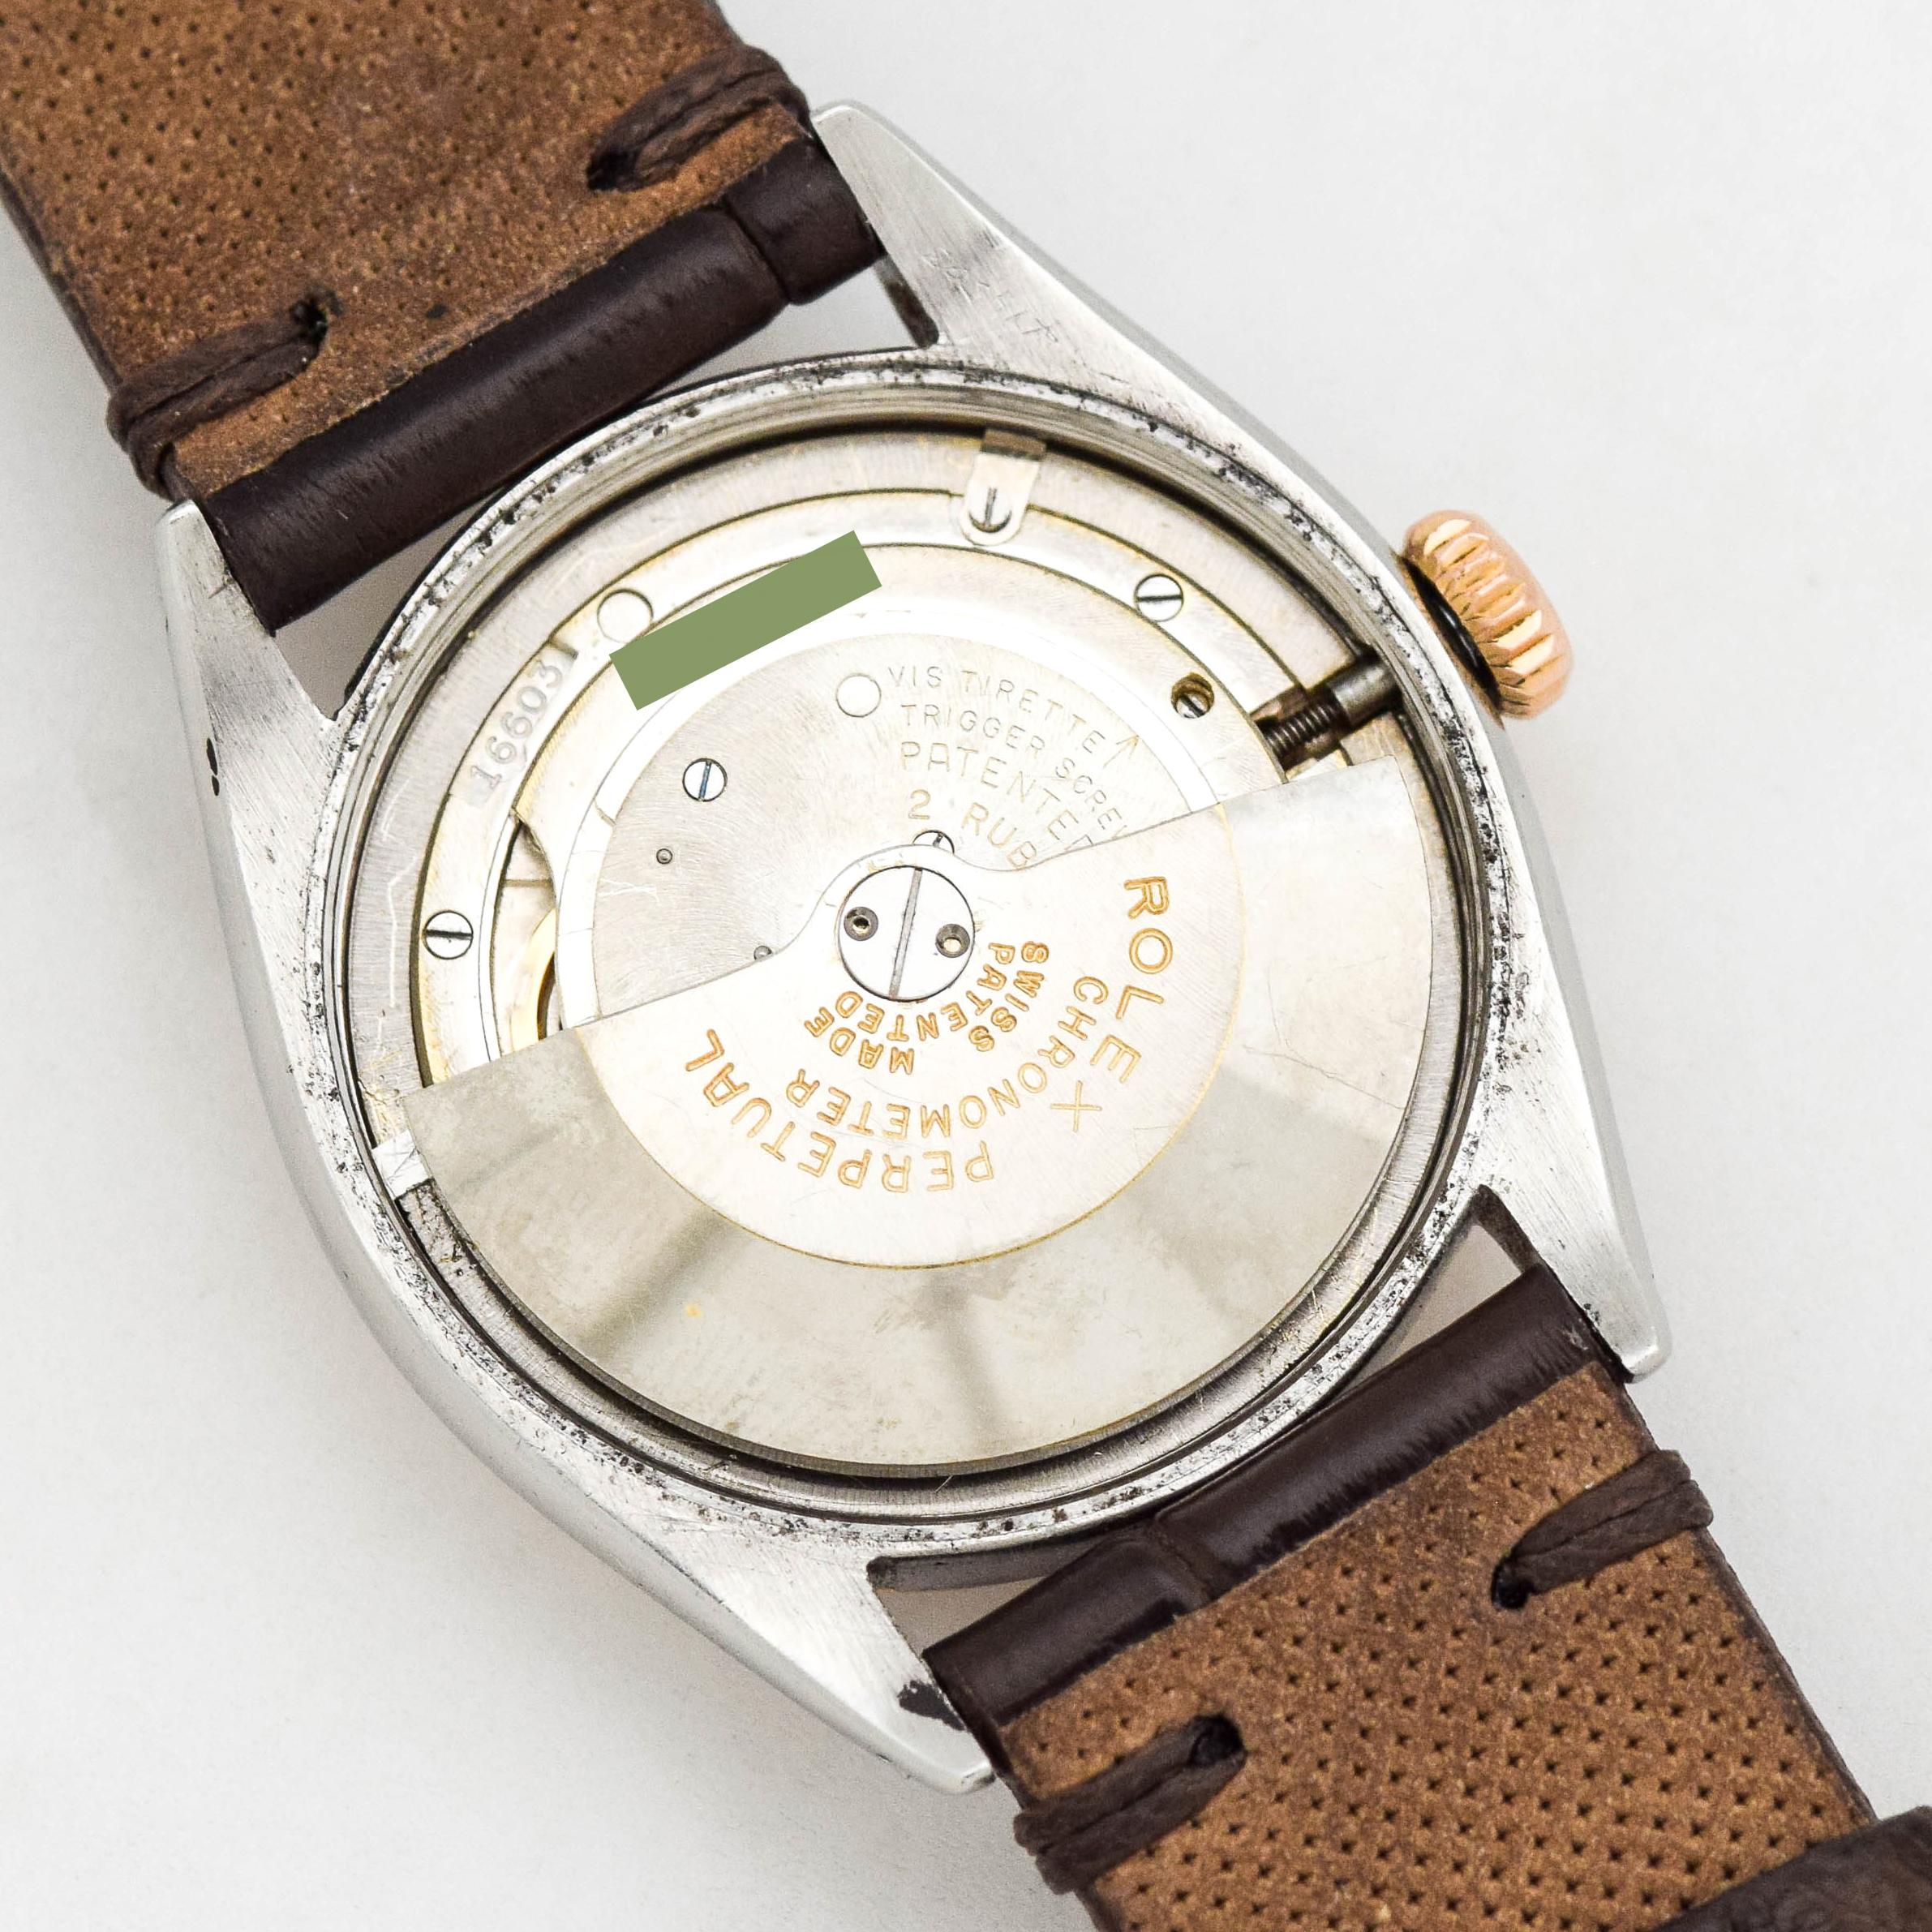 Vintage Rolex Oyster Perpetual Ref. 6085 Watch, 1953 For Sale 4